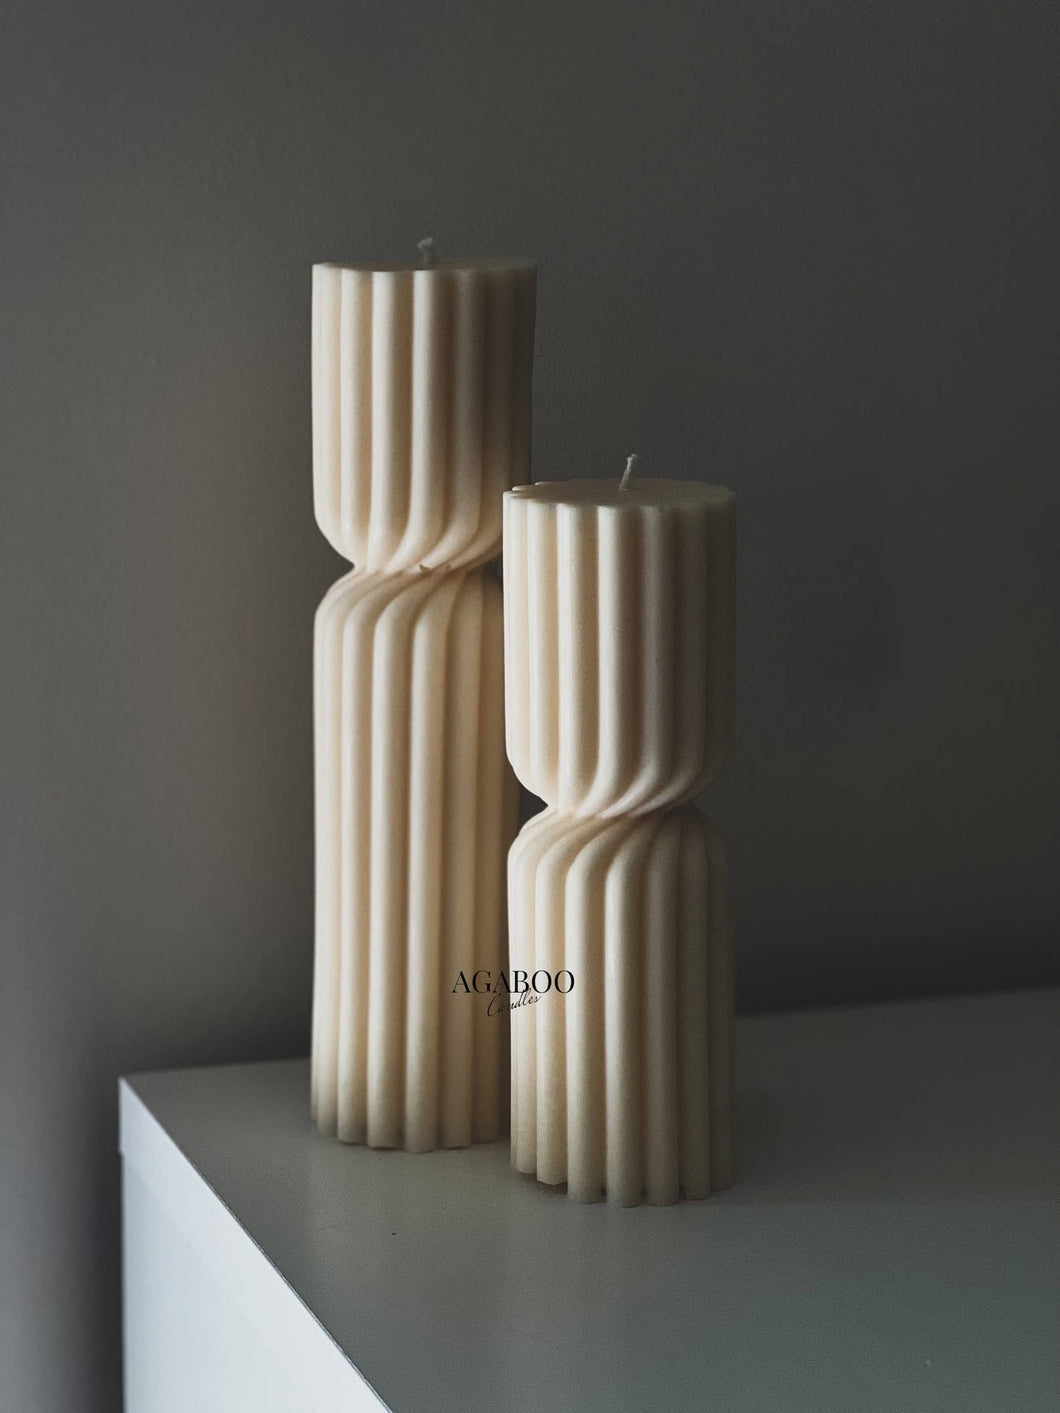 Agaboo Candle - Huge Twisted Ribbed Pillar Candle: Golden Honey / Large